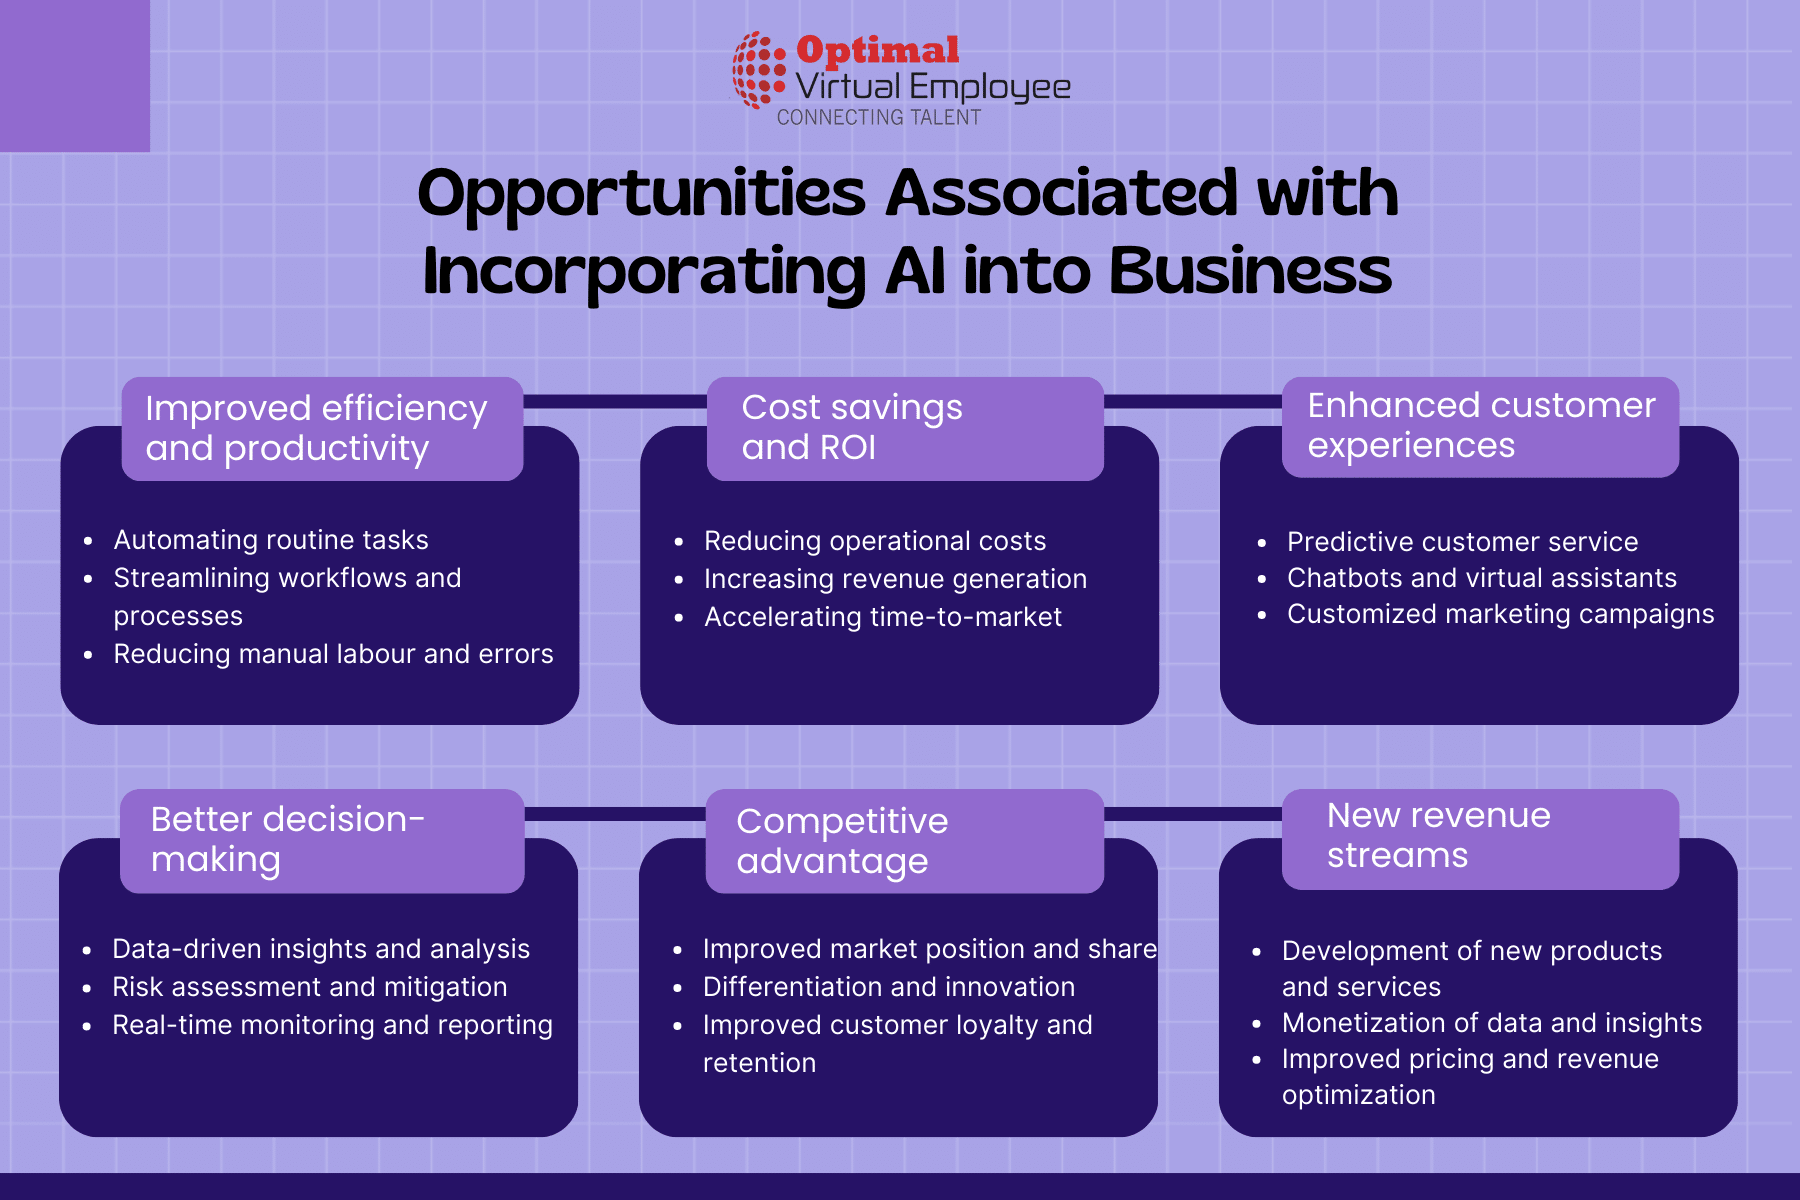 Opportunities Associated with Incorporating AI into Business